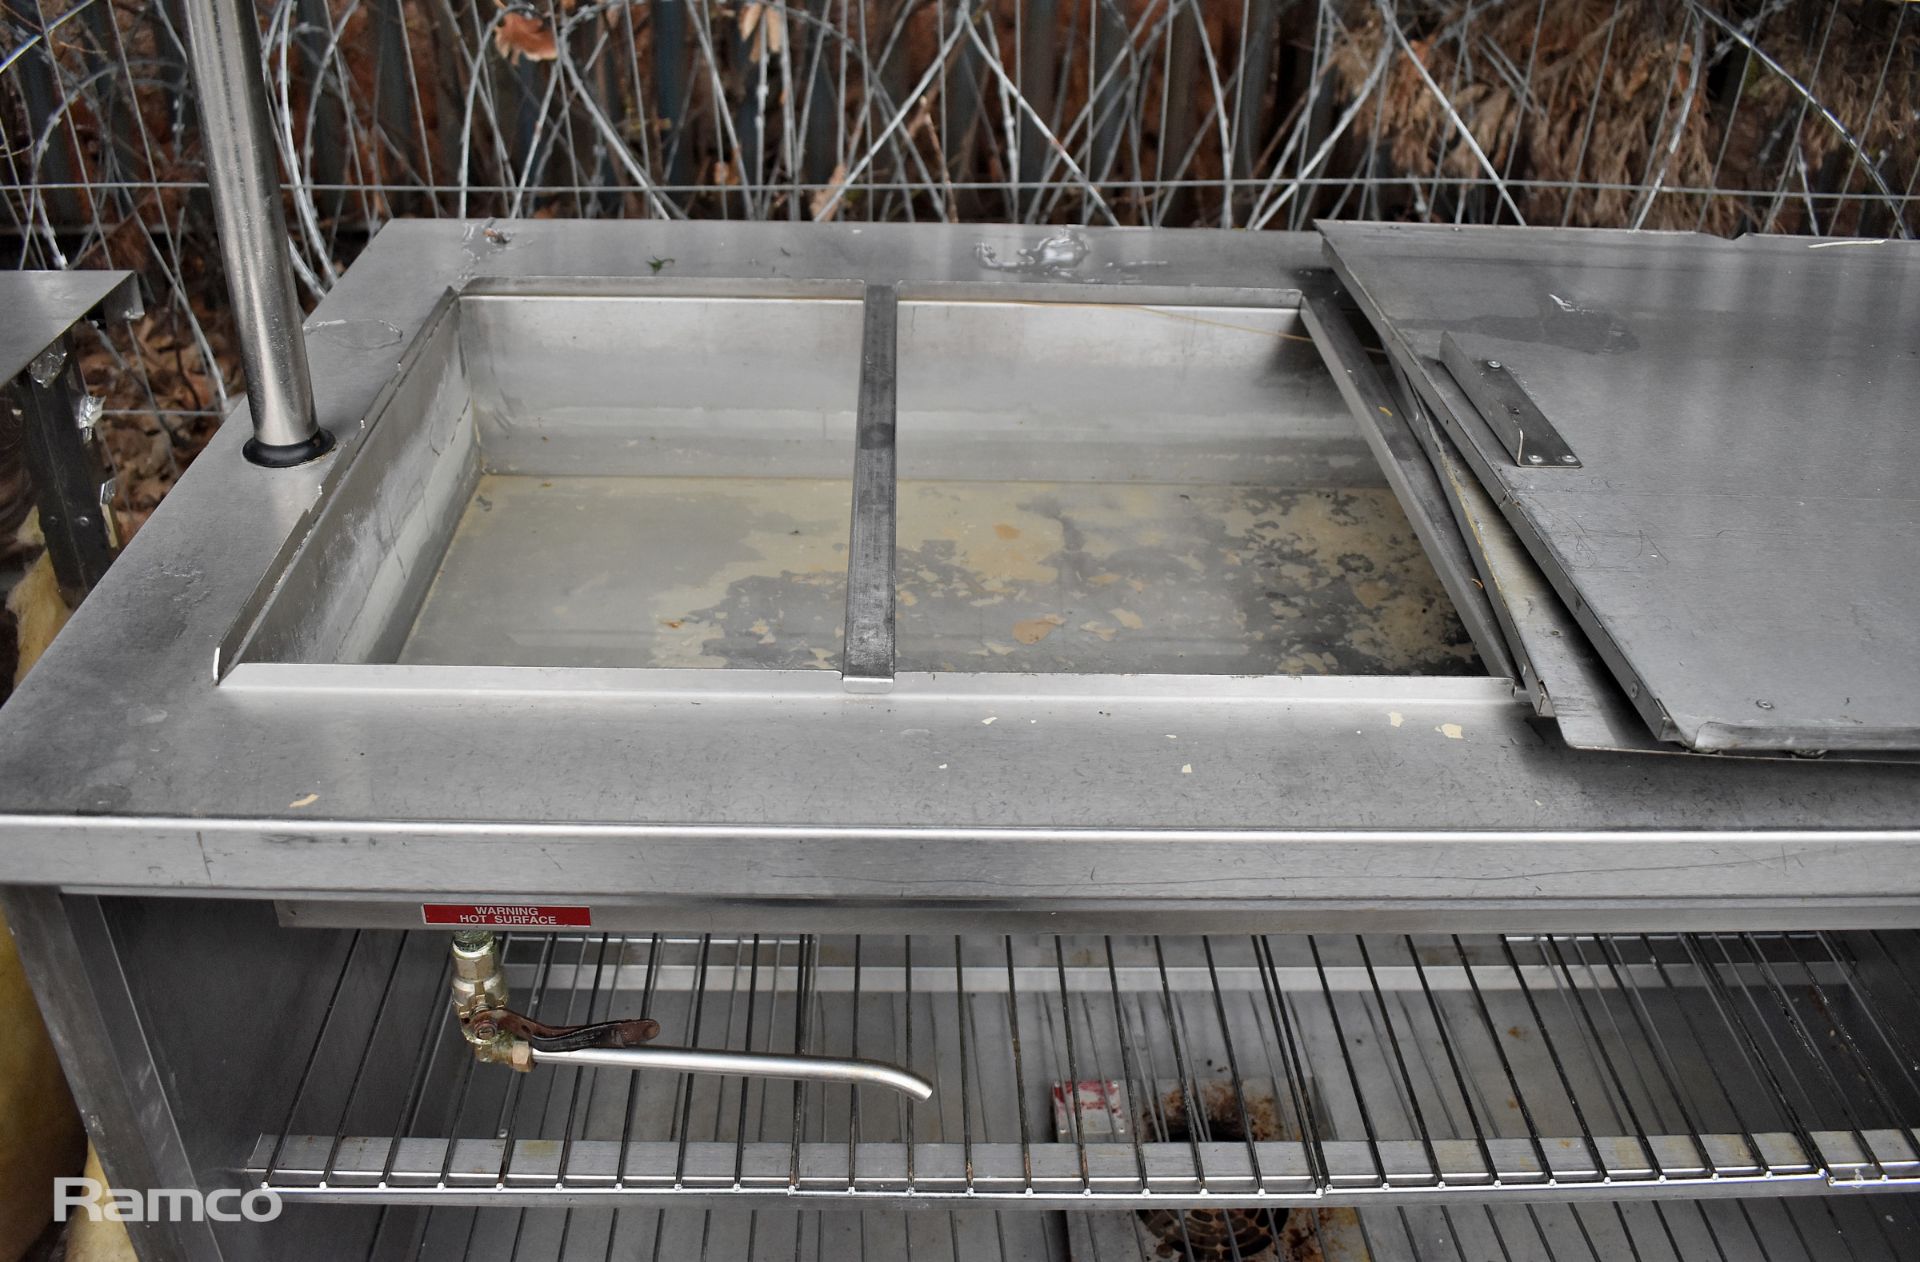 Moffat stainless steel bain marie with heated gantry - L155 x W80 x H132cm - Image 13 of 17